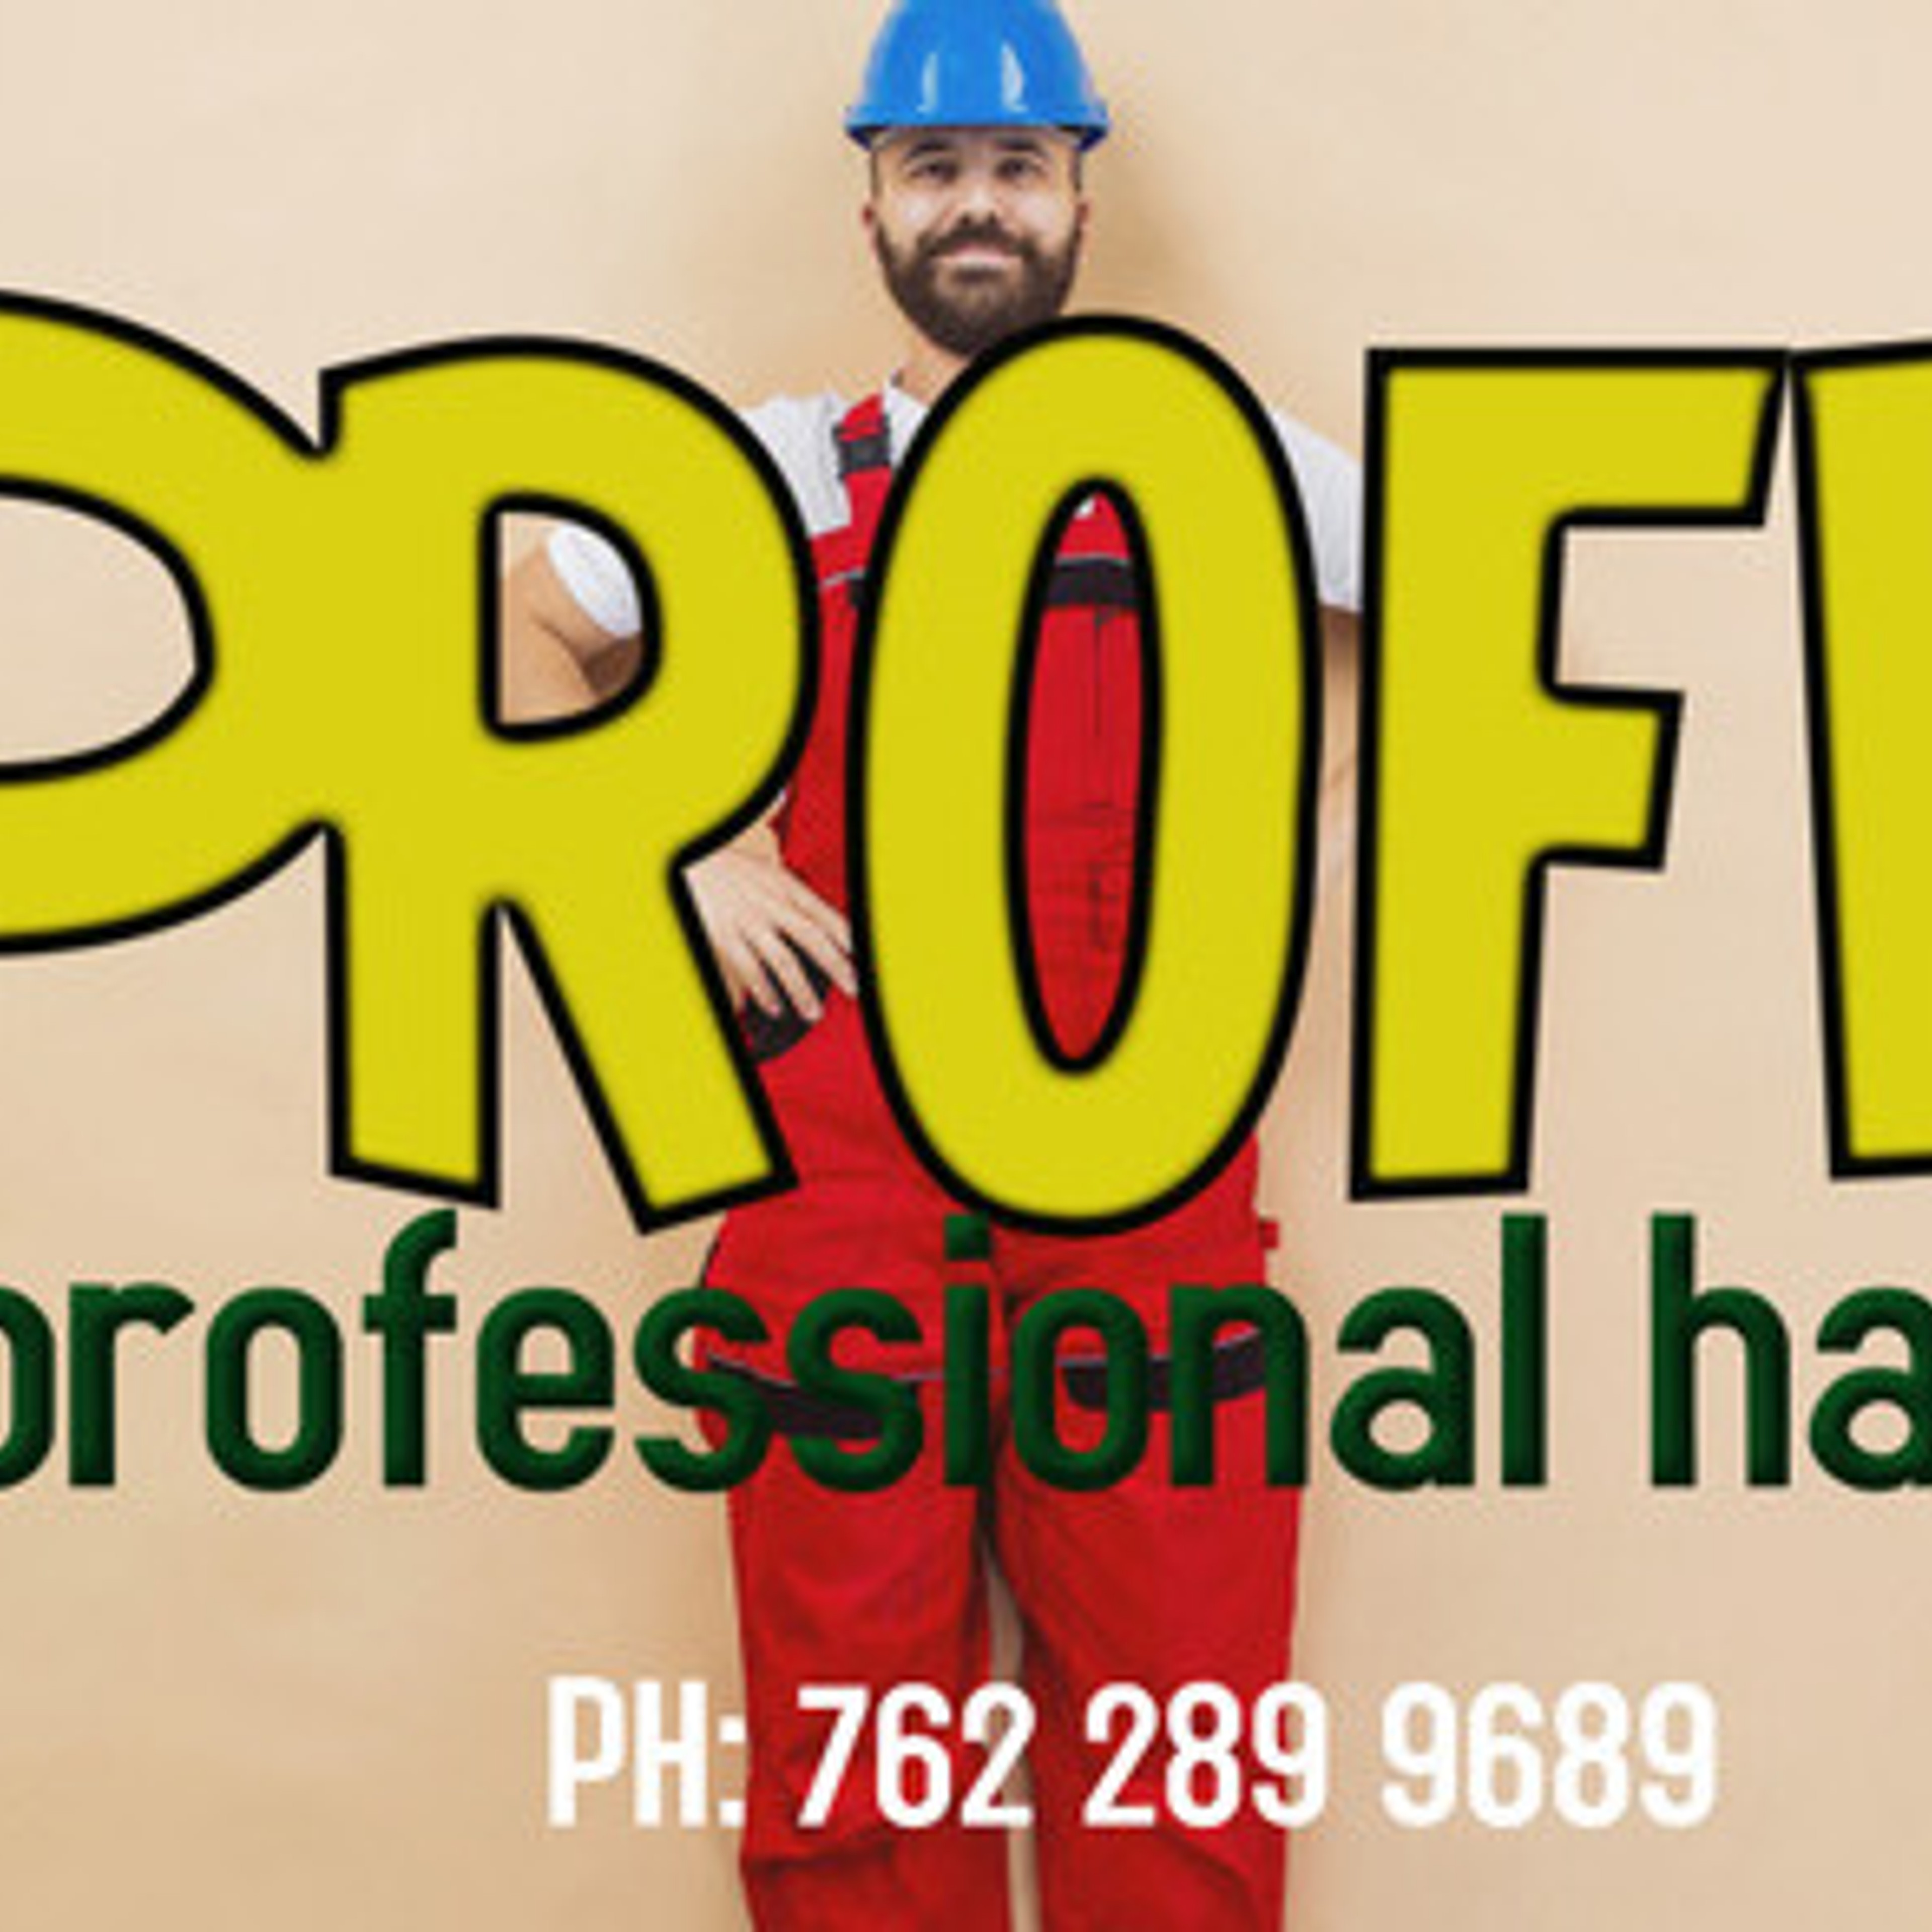 Professional, Efficient, Courteous and Dedicated Handyman